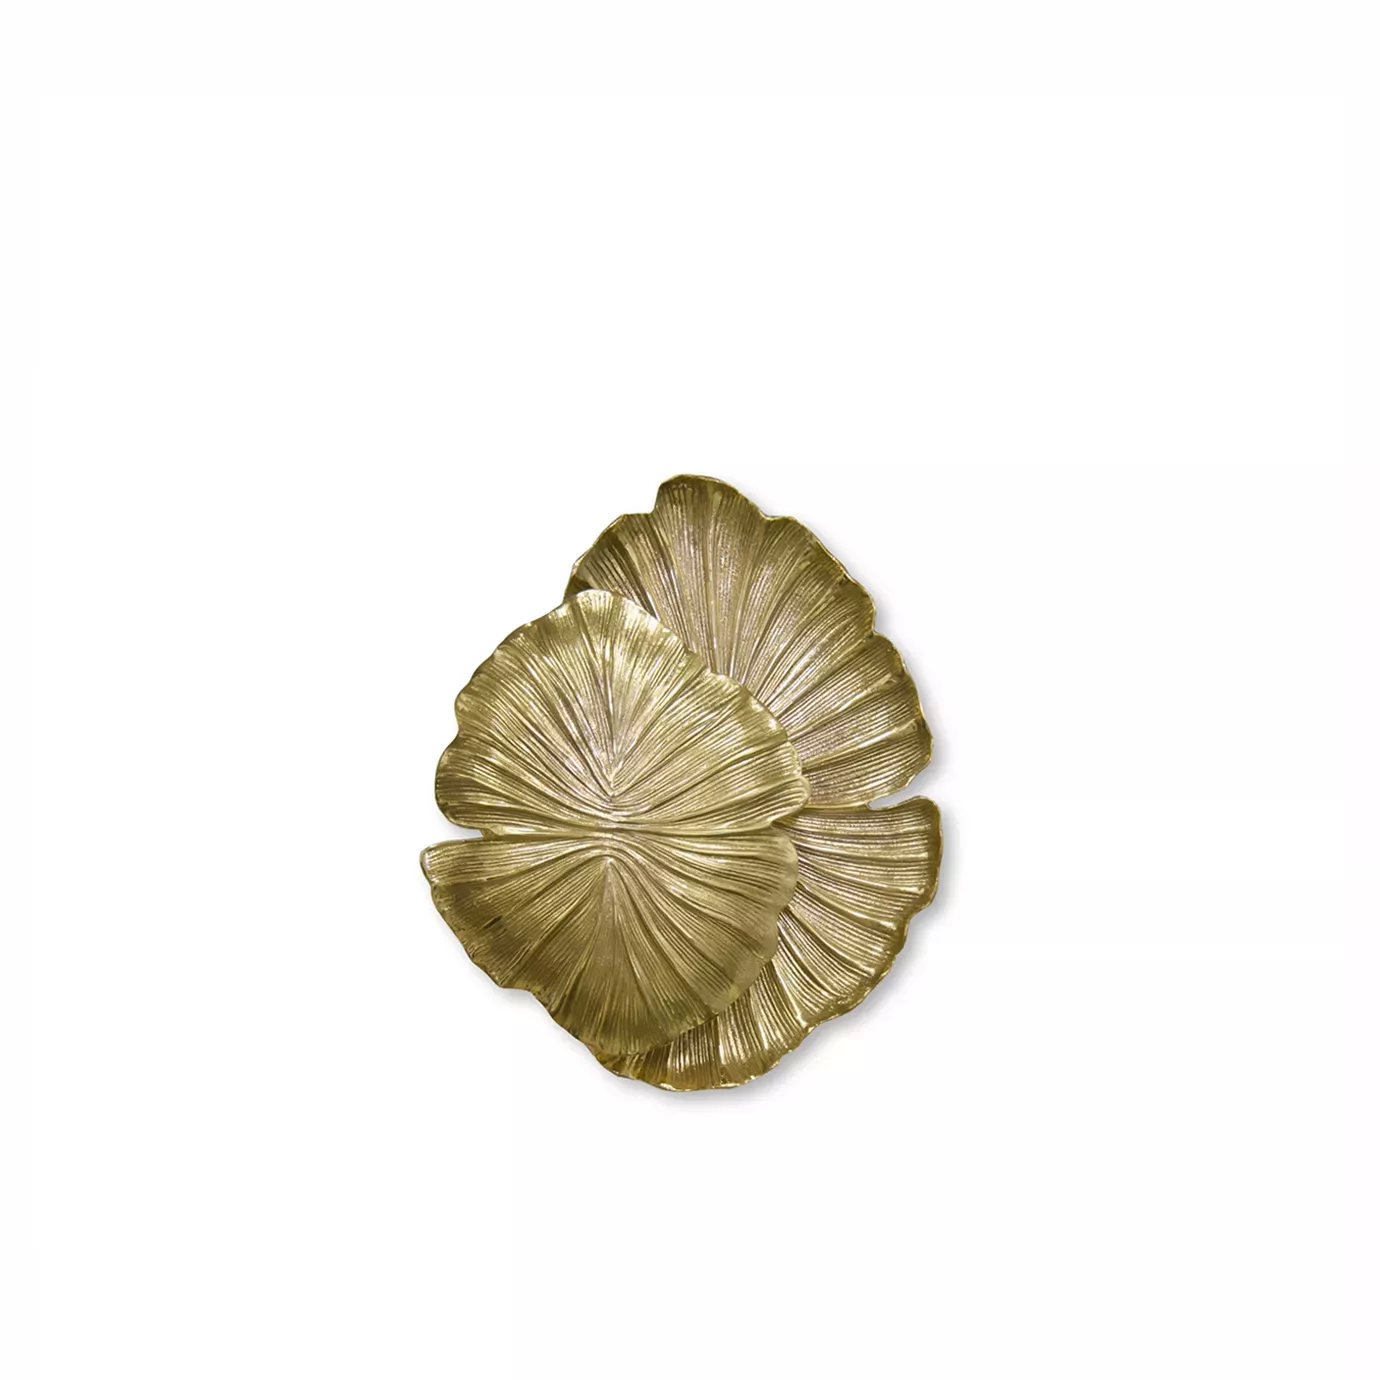 Inspired by nature, this luminous wall sconce symbolizes the link between first love and a flower when it first blooms.